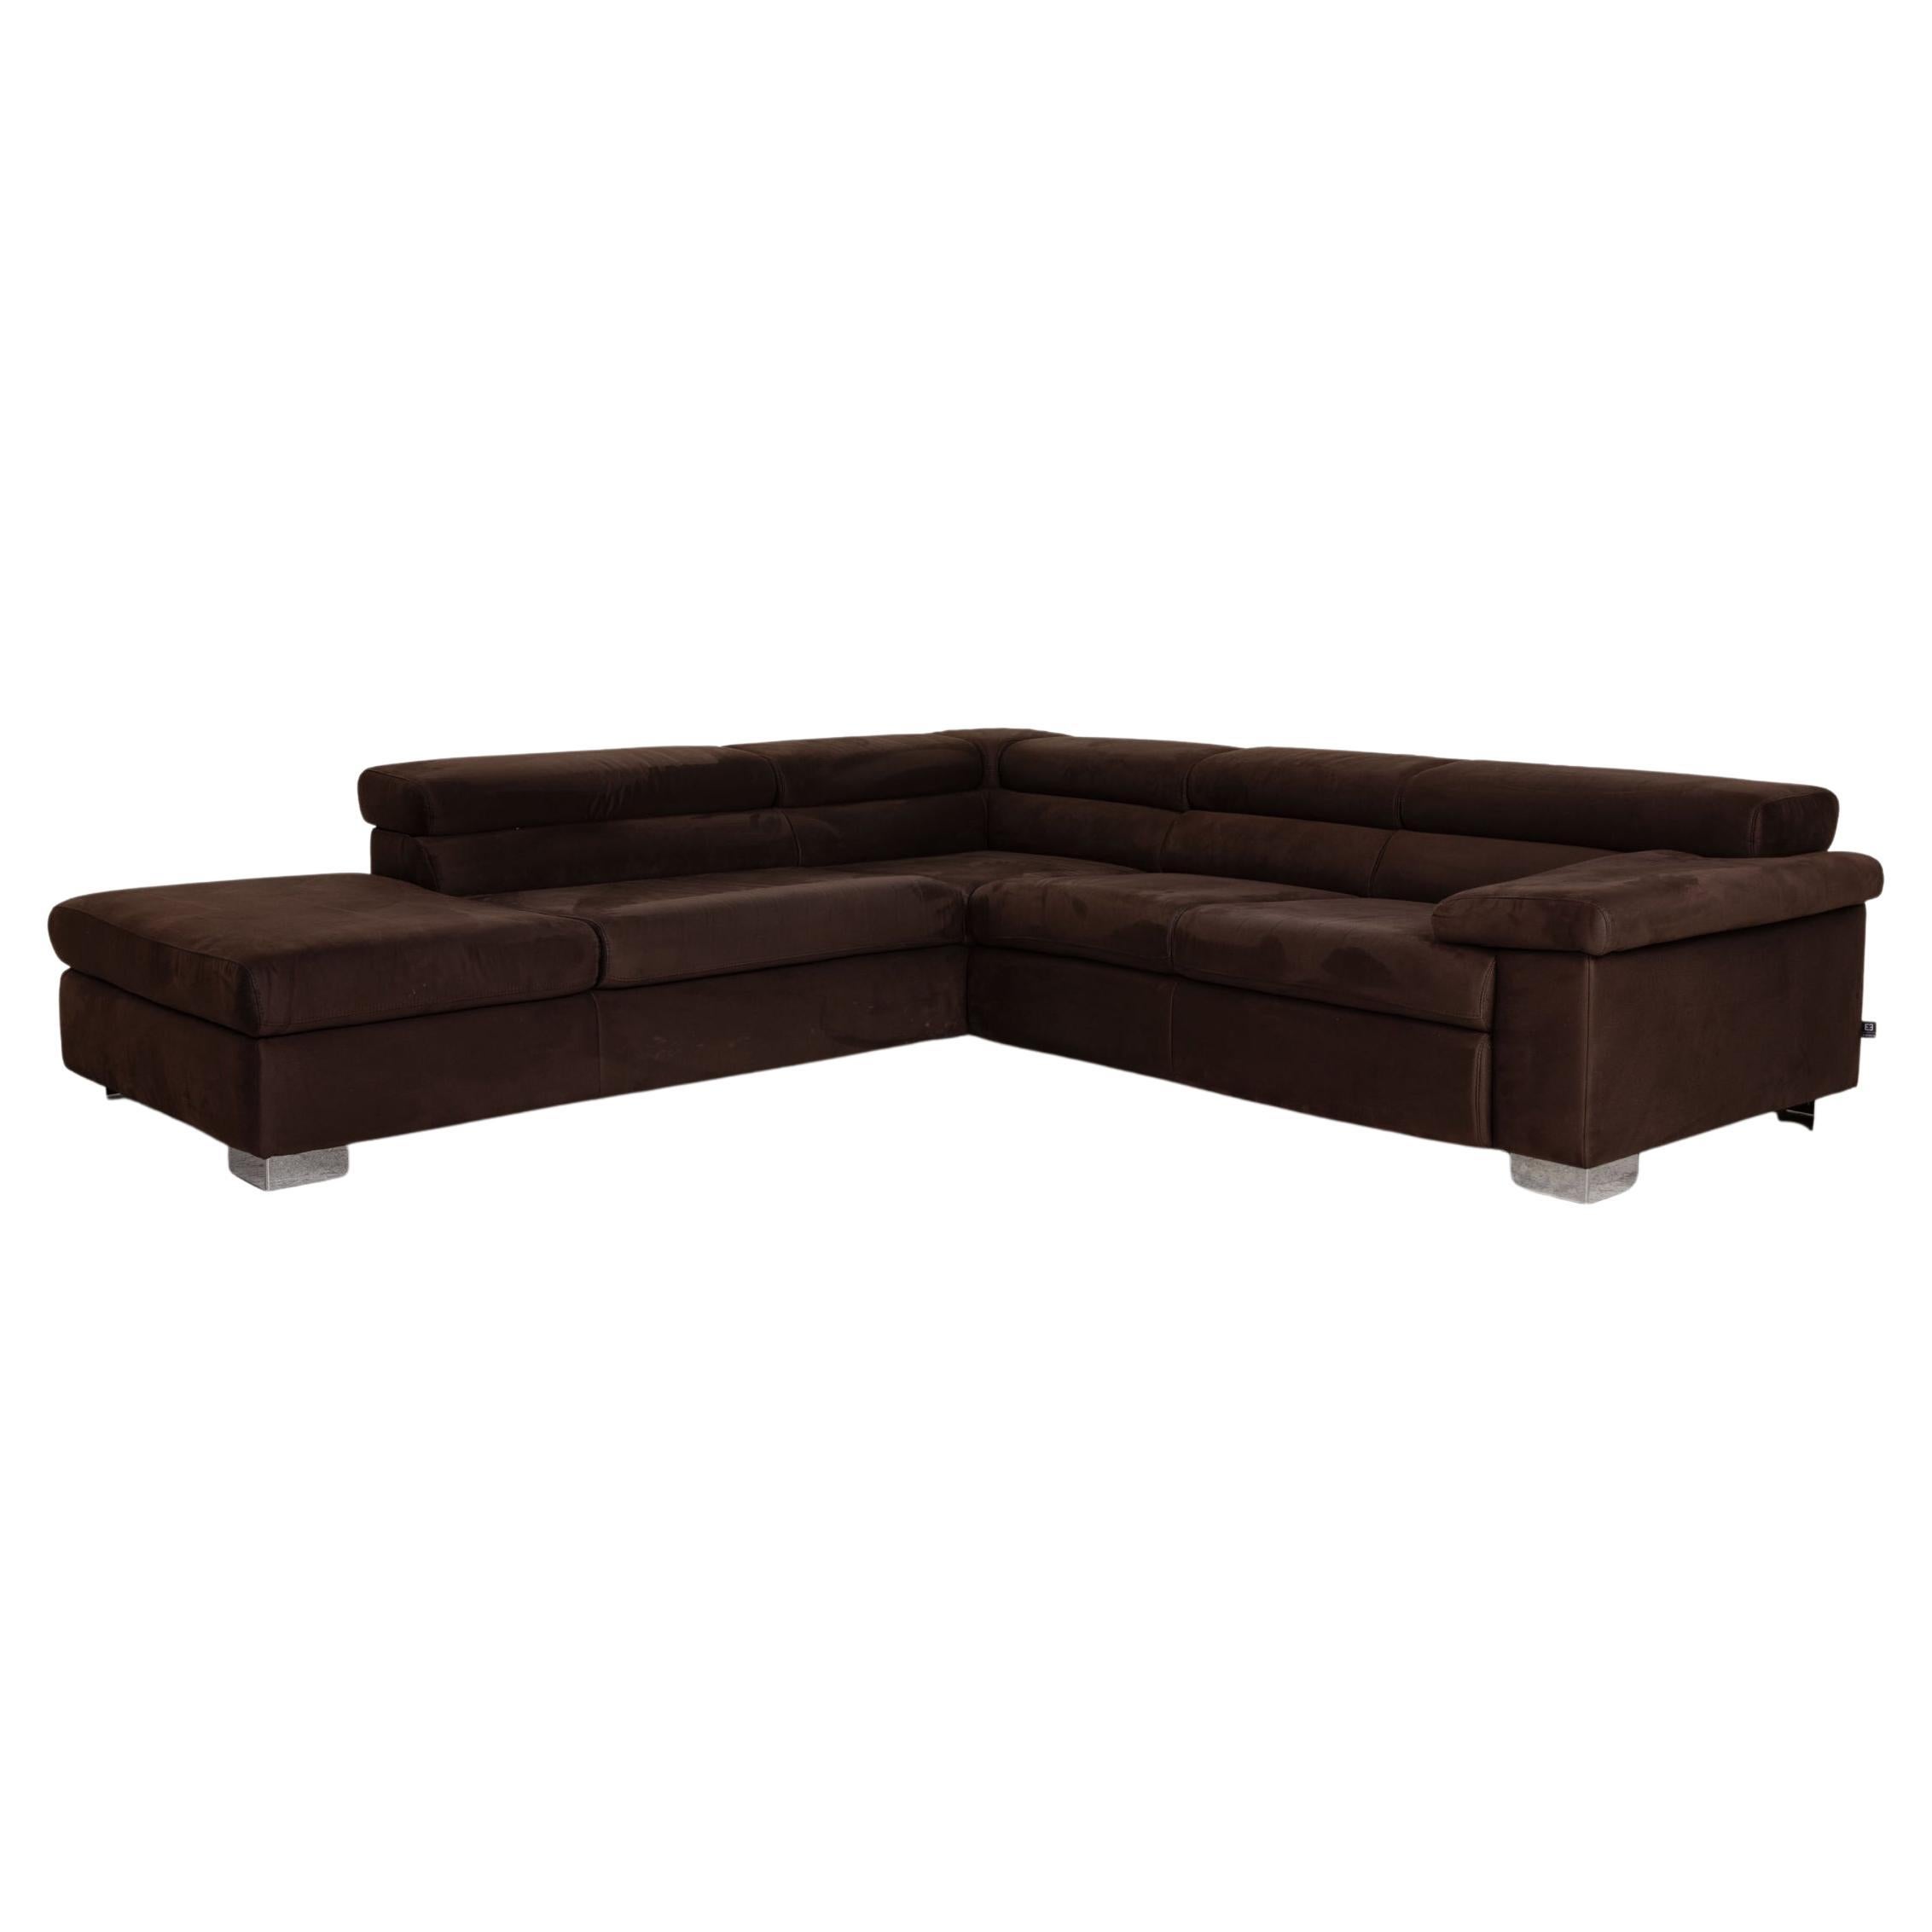 Ewald Schillig Leather Sofa Brown Corner Sofa Function Couch For Sale